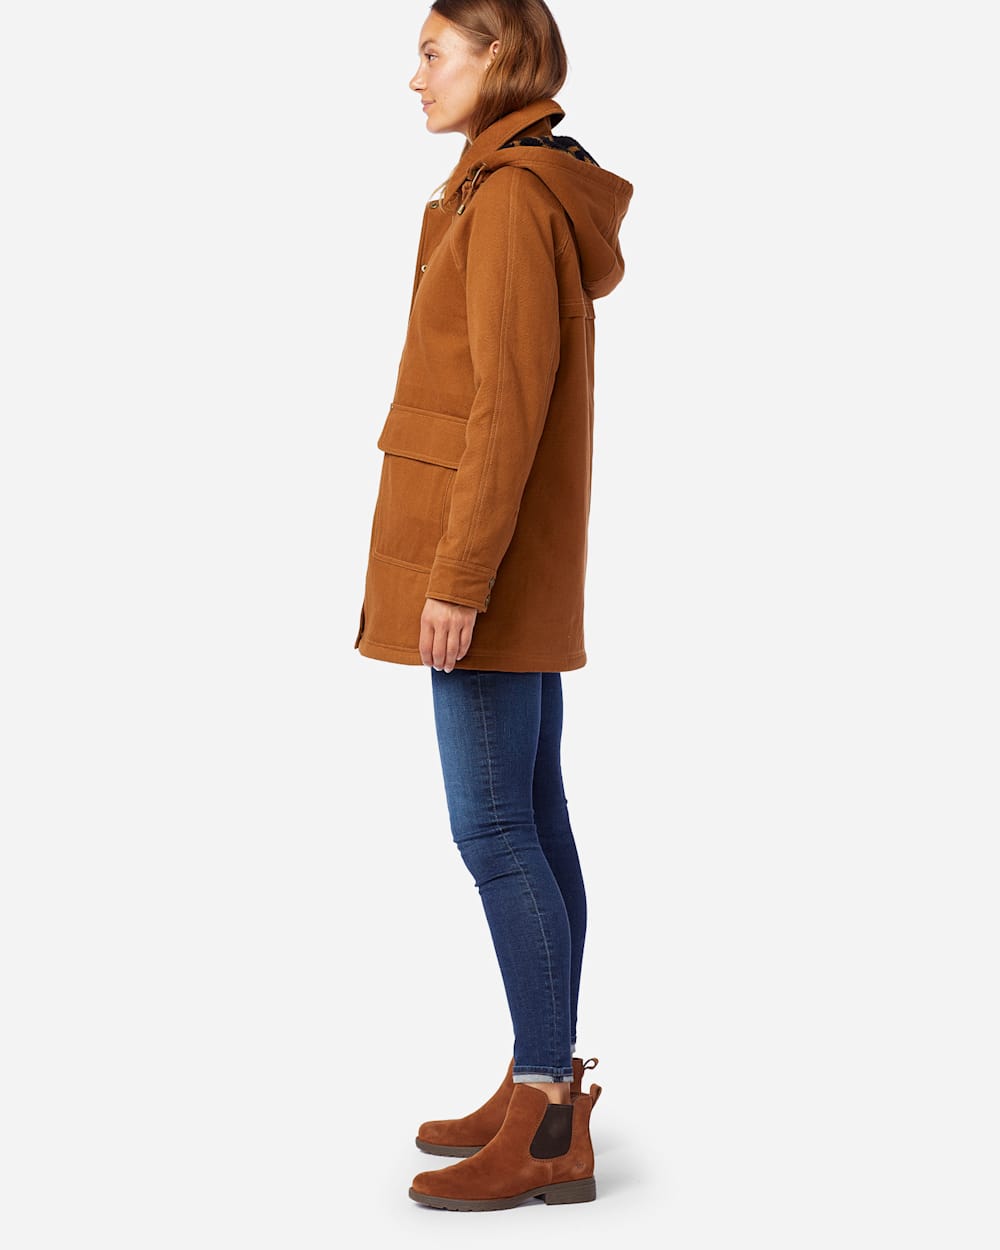 ALTERNATE VIEW OF WOMEN'S ST HELENA SHERPA-LINED COAT IN WHISKEY image number 3